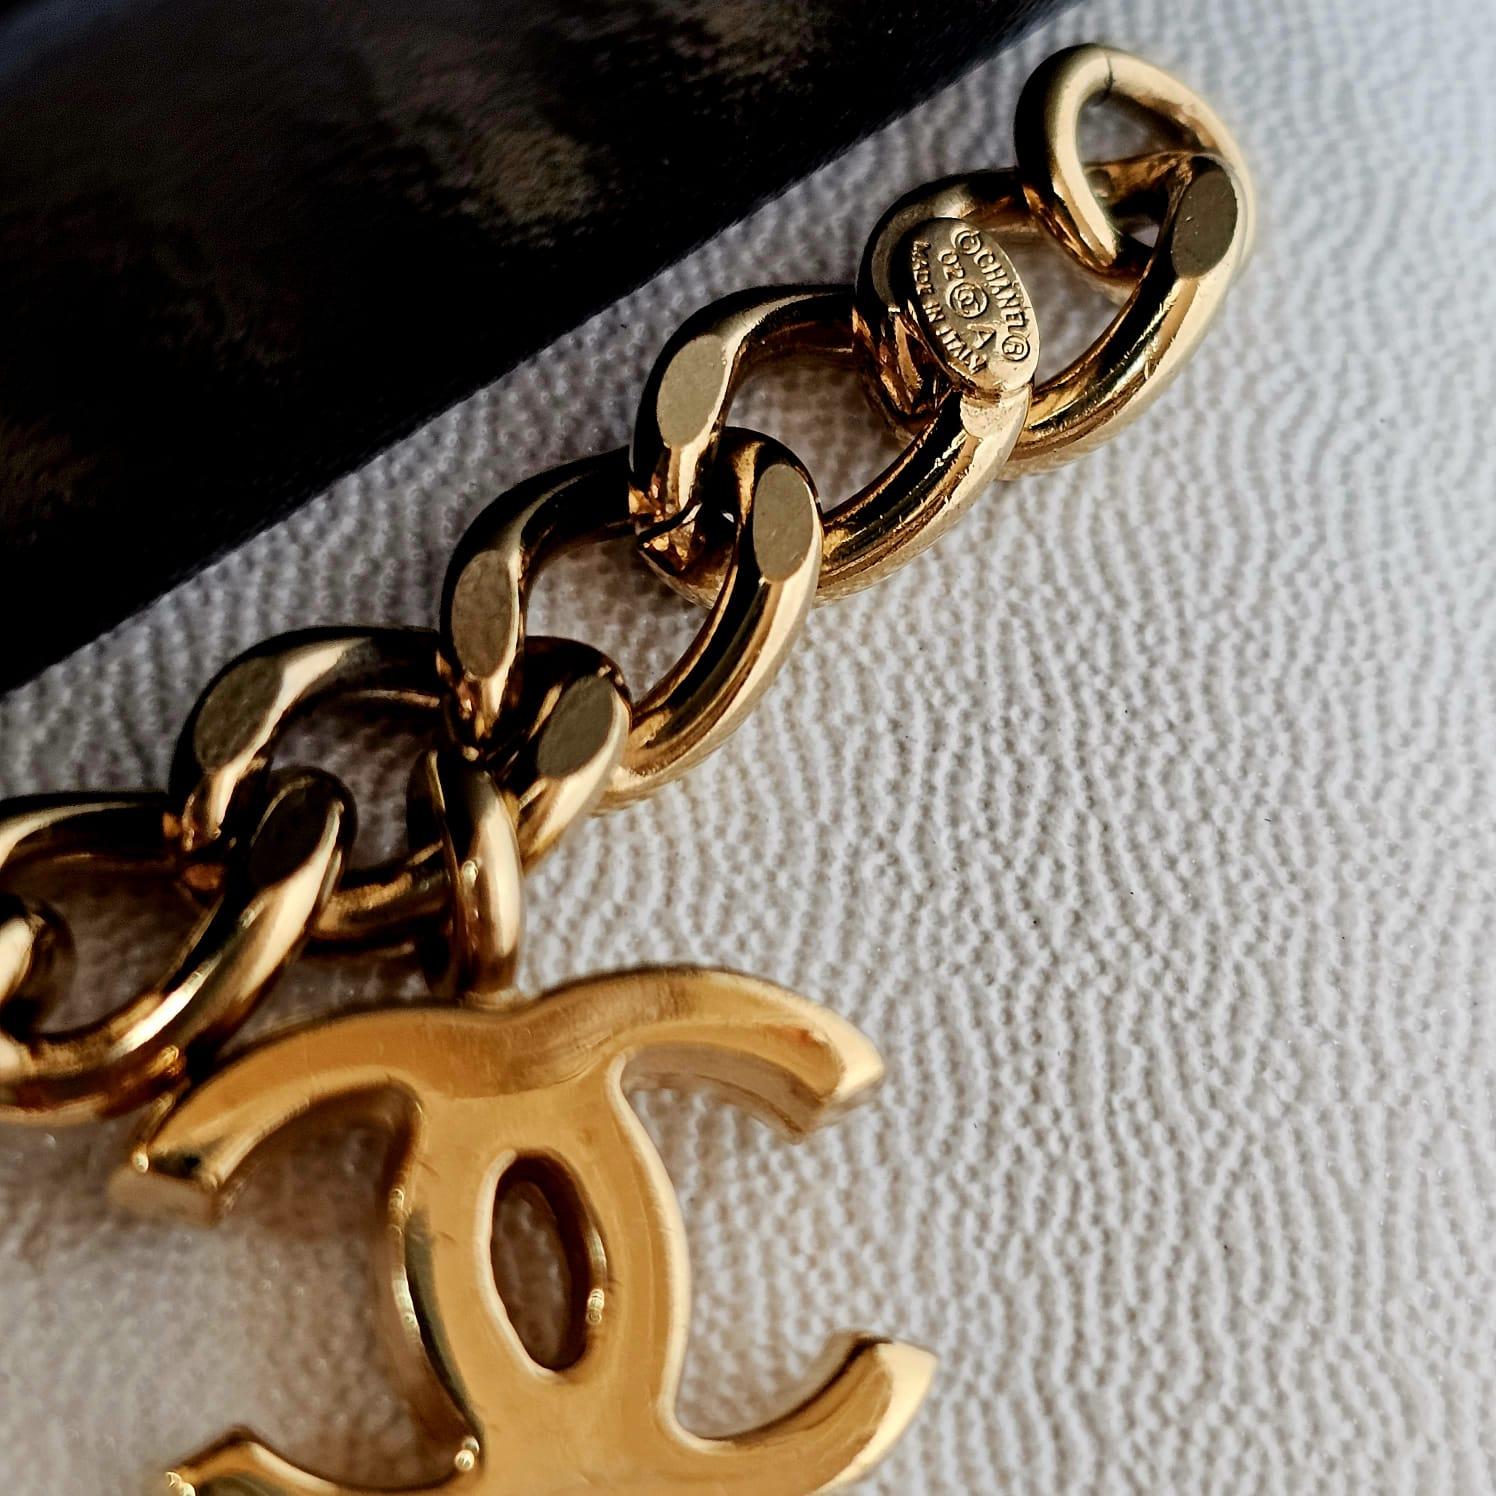 Rare chanel logo charm bracelet in excellent condition. Playful yet classy piece of jewelry. Comes with its box. 